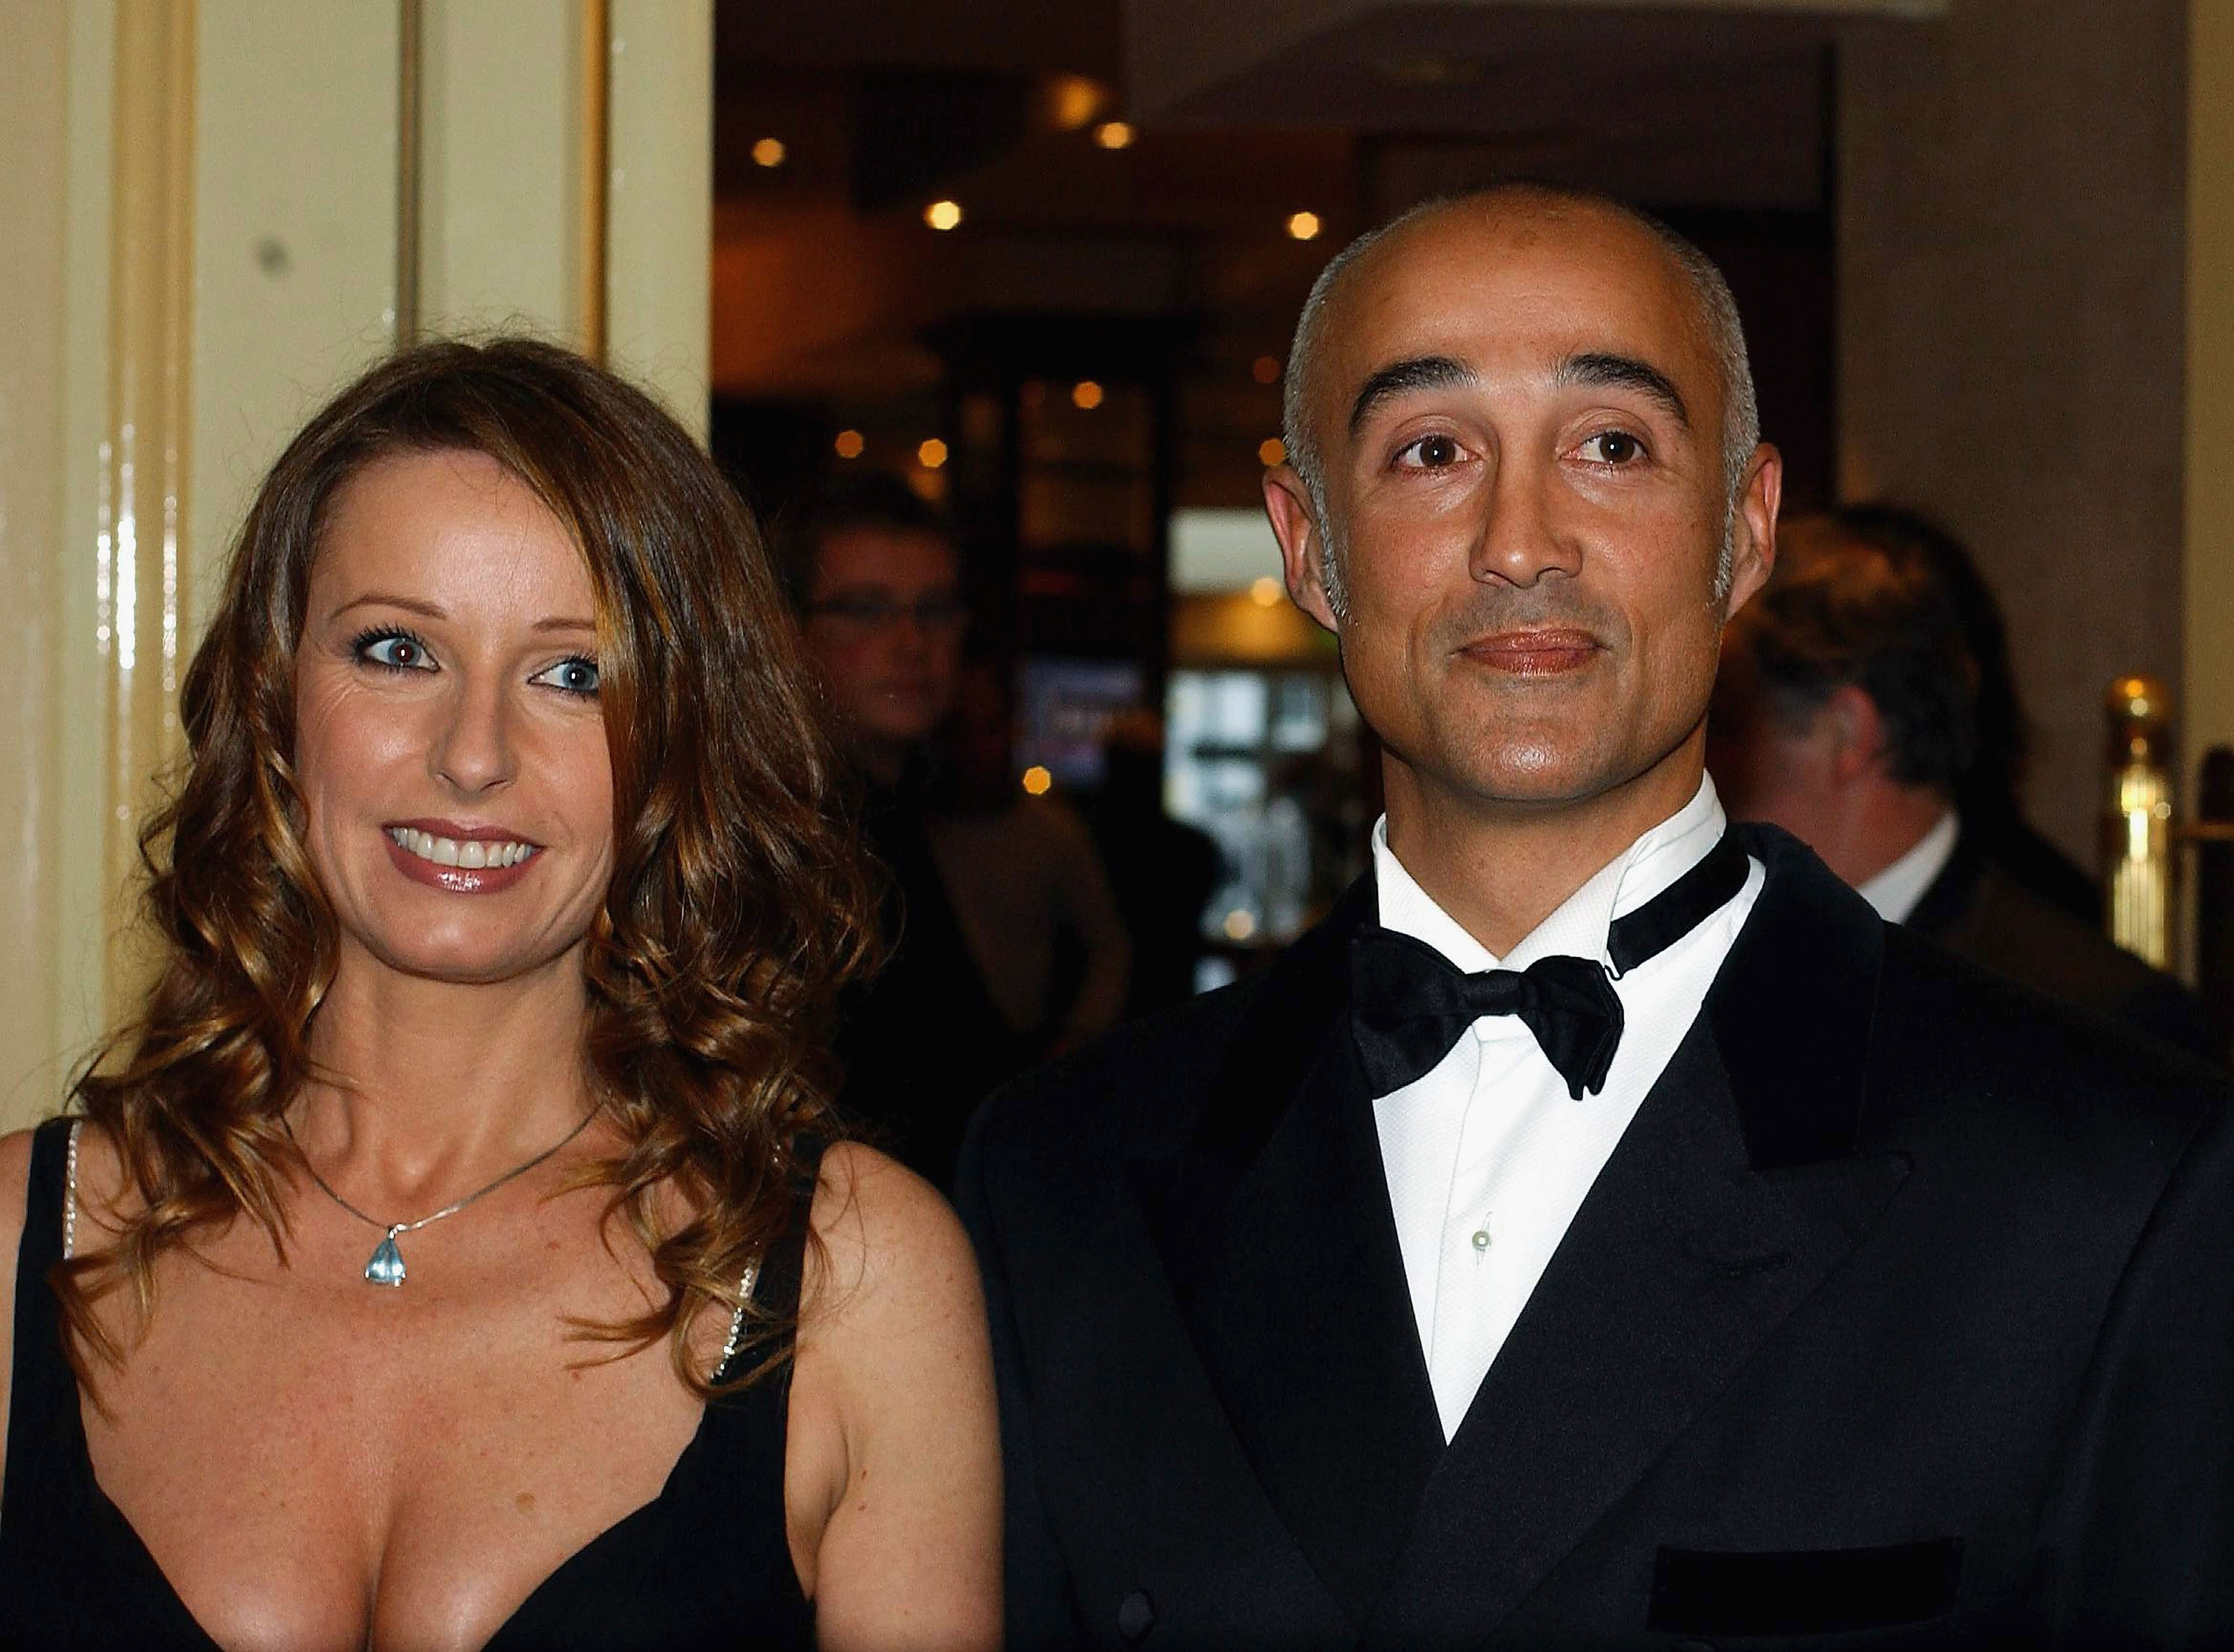 DUBLIN, IRELAND - MAY 5: (L-R) Wham's Andrew Ridgely and wife Bananarama's Keren Woodward attend Keith O'Neill's charity benefit dinner at The Burlington Hotel on May 5, 2005 in Dublin, Ireland.